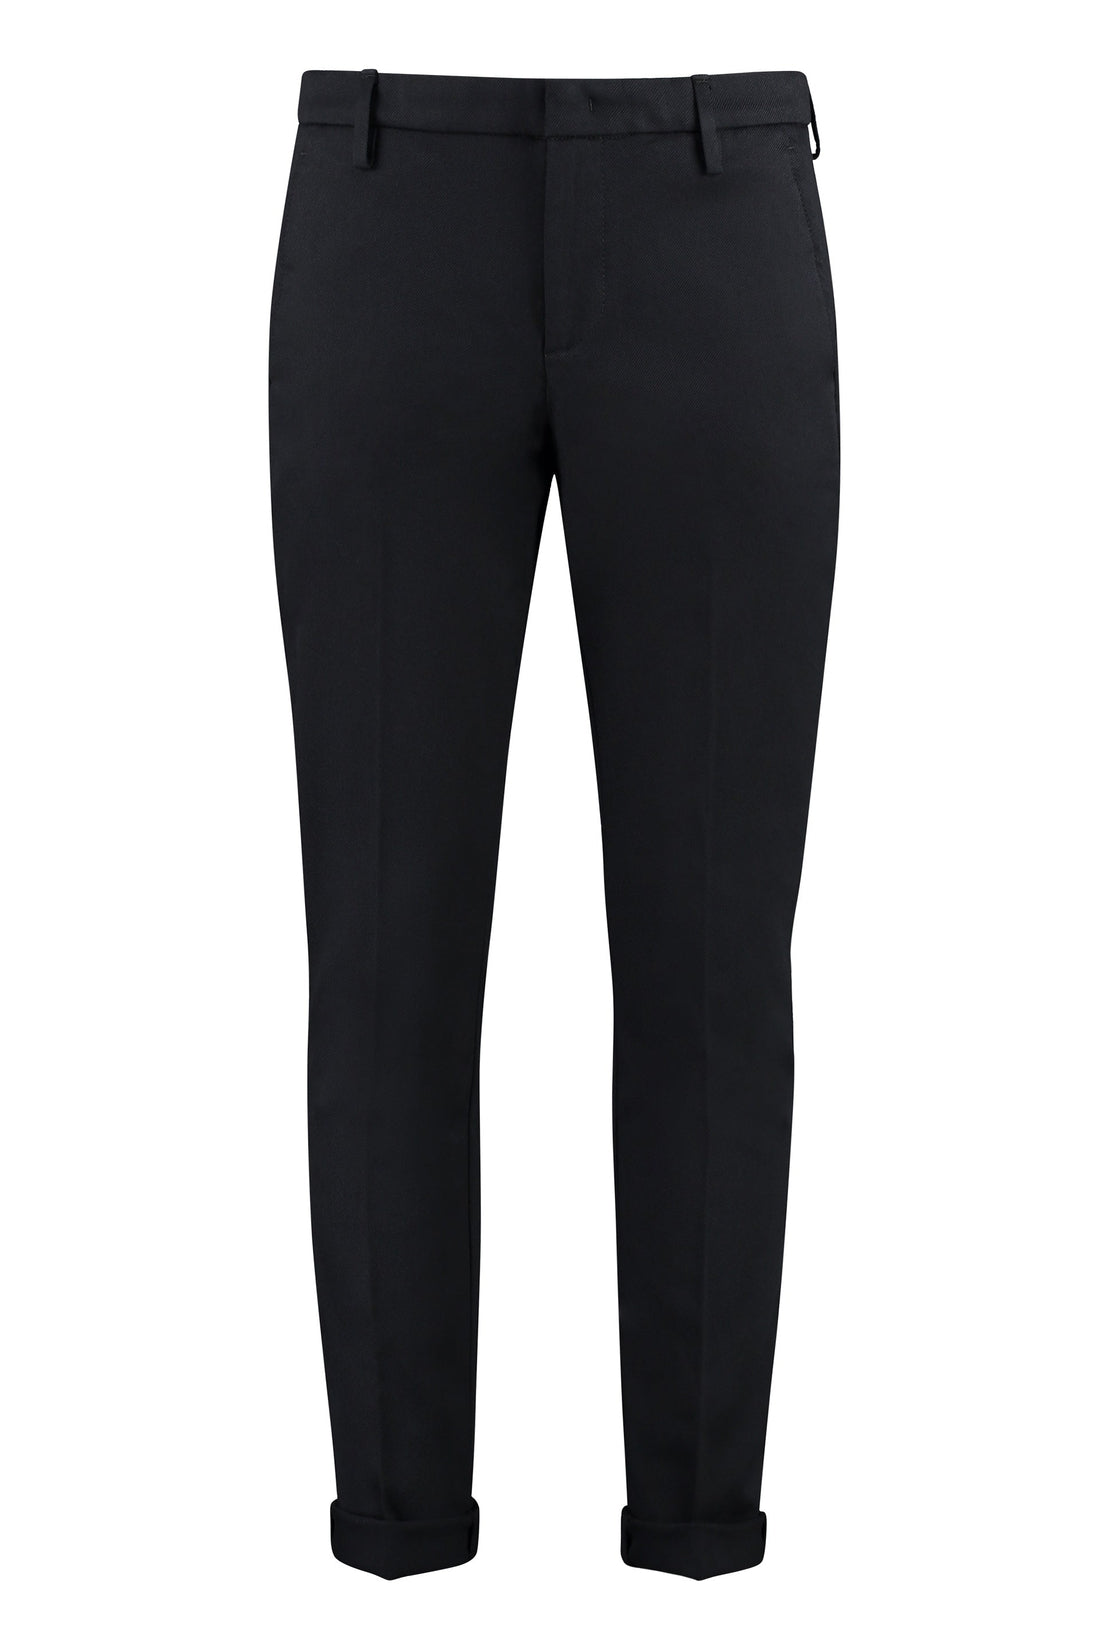 Gaubert wool and cotton trousers